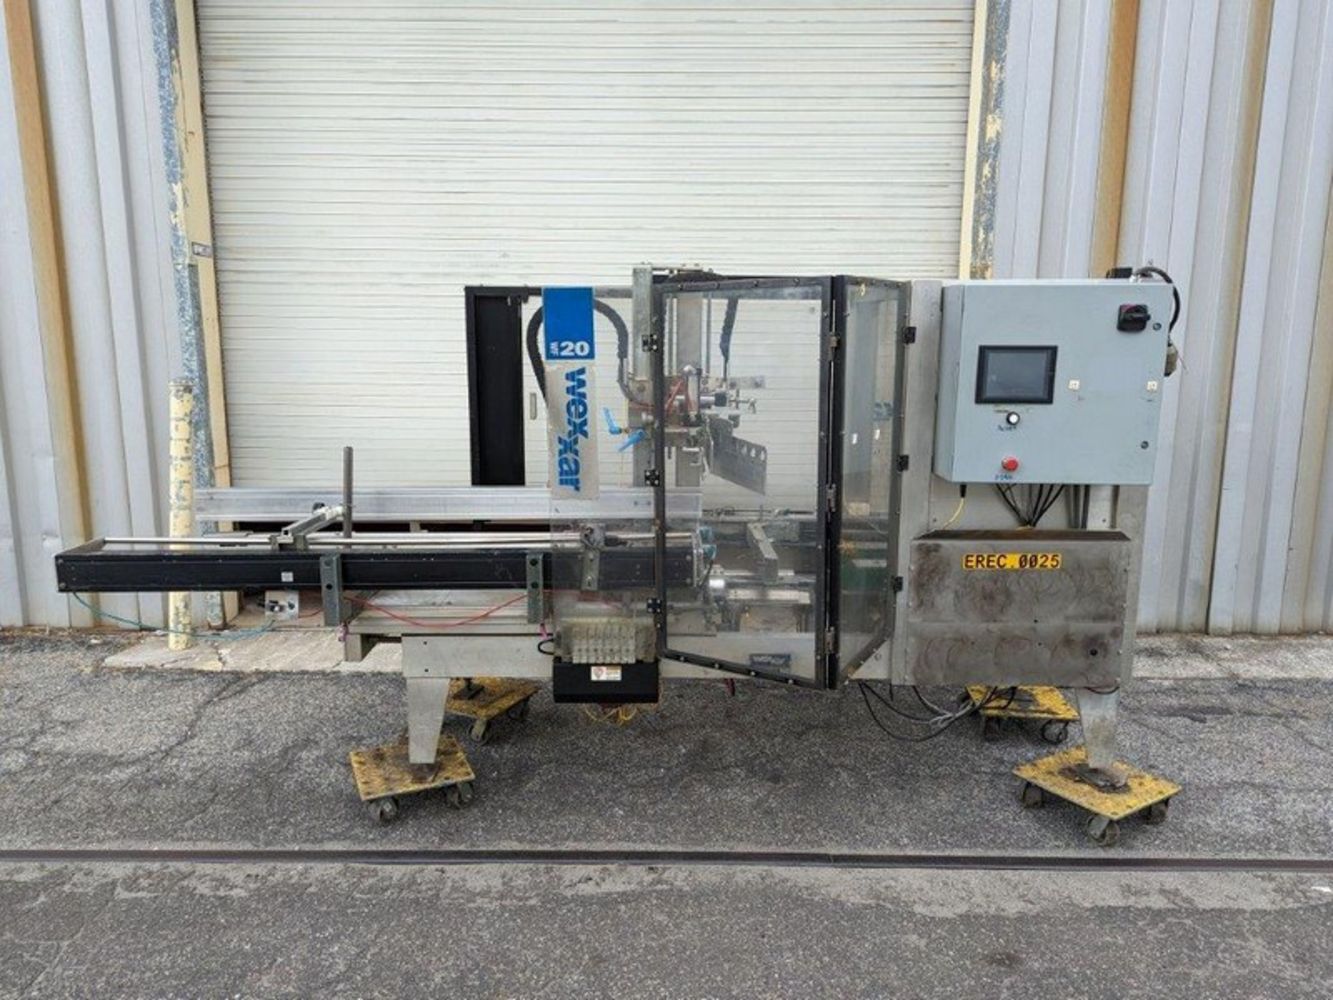 JUNE Multi-Location Food and Beverage Equipment Auction - Contact M Davis Group to Consign YOUR Equipment